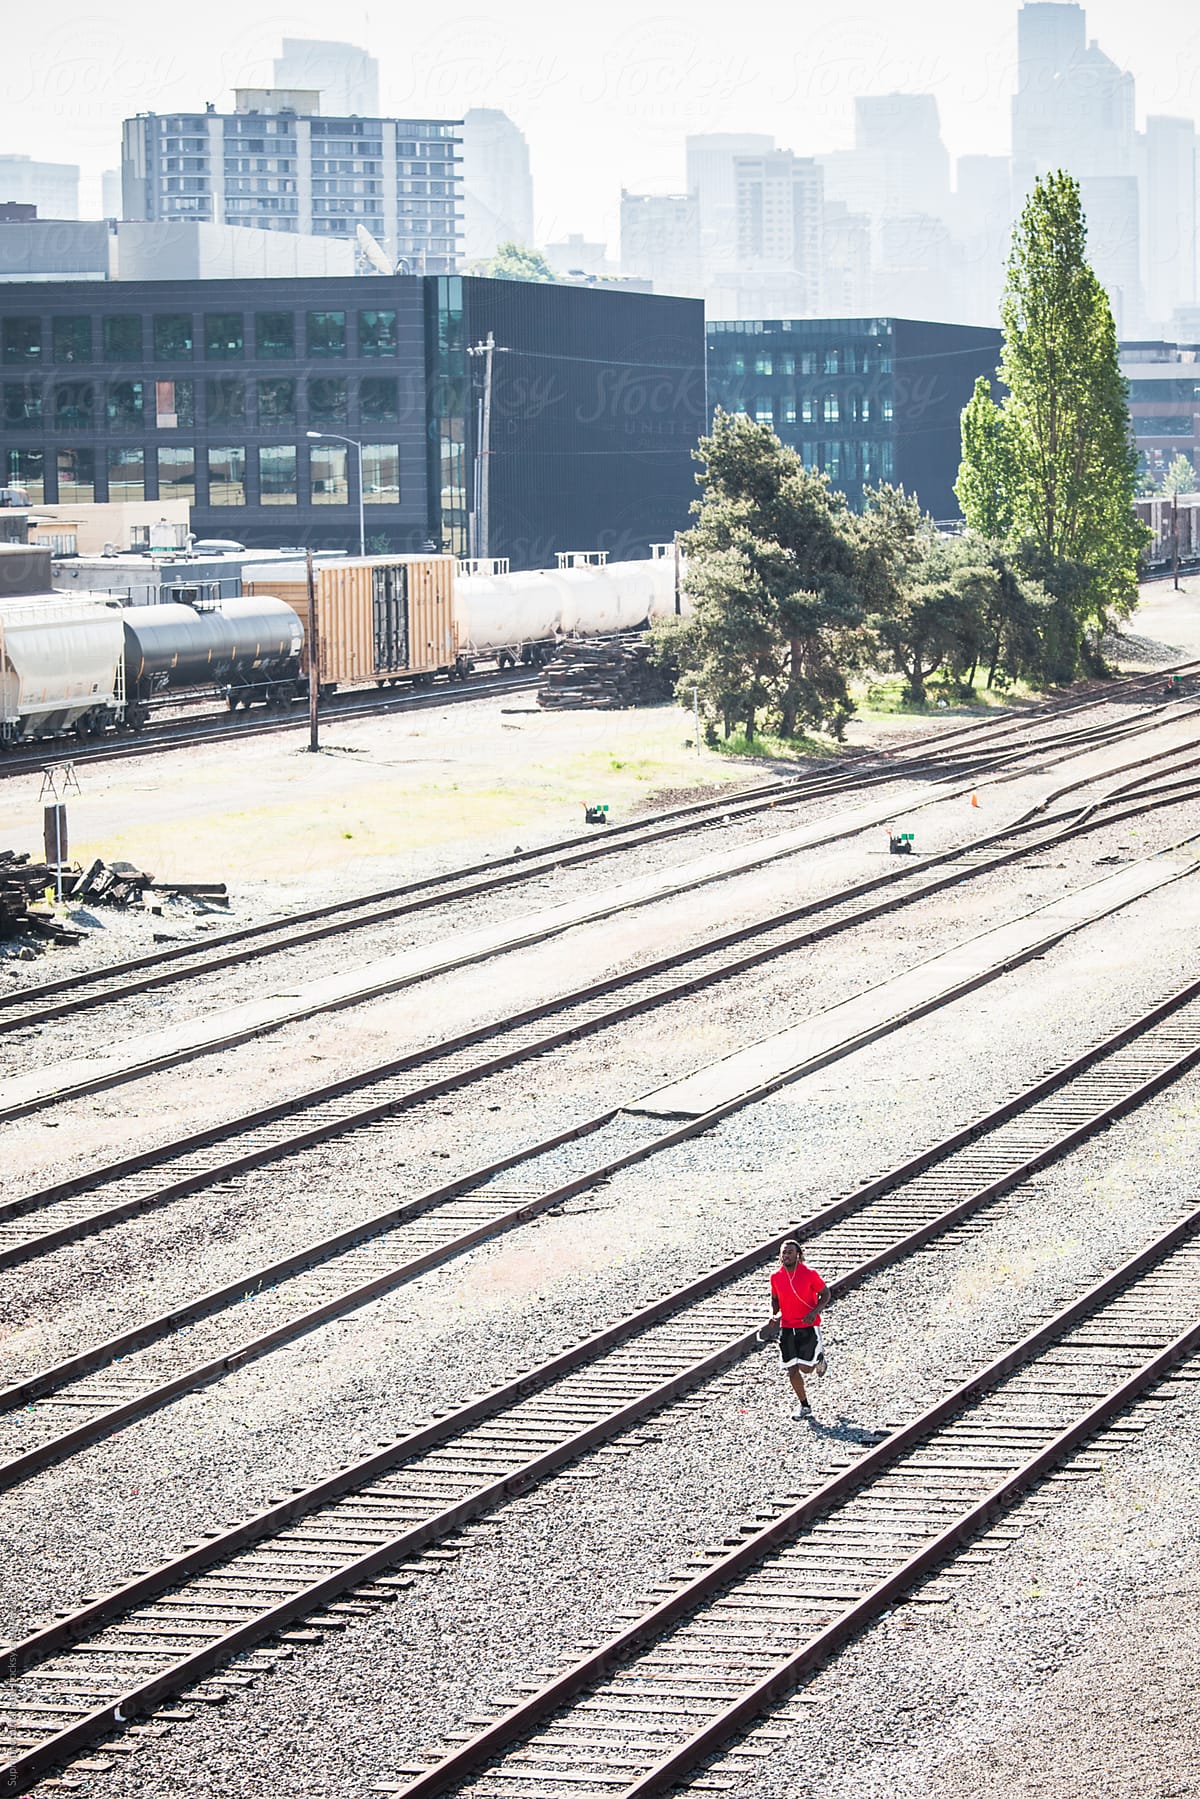 Male athlete running in an urban area next to railroads